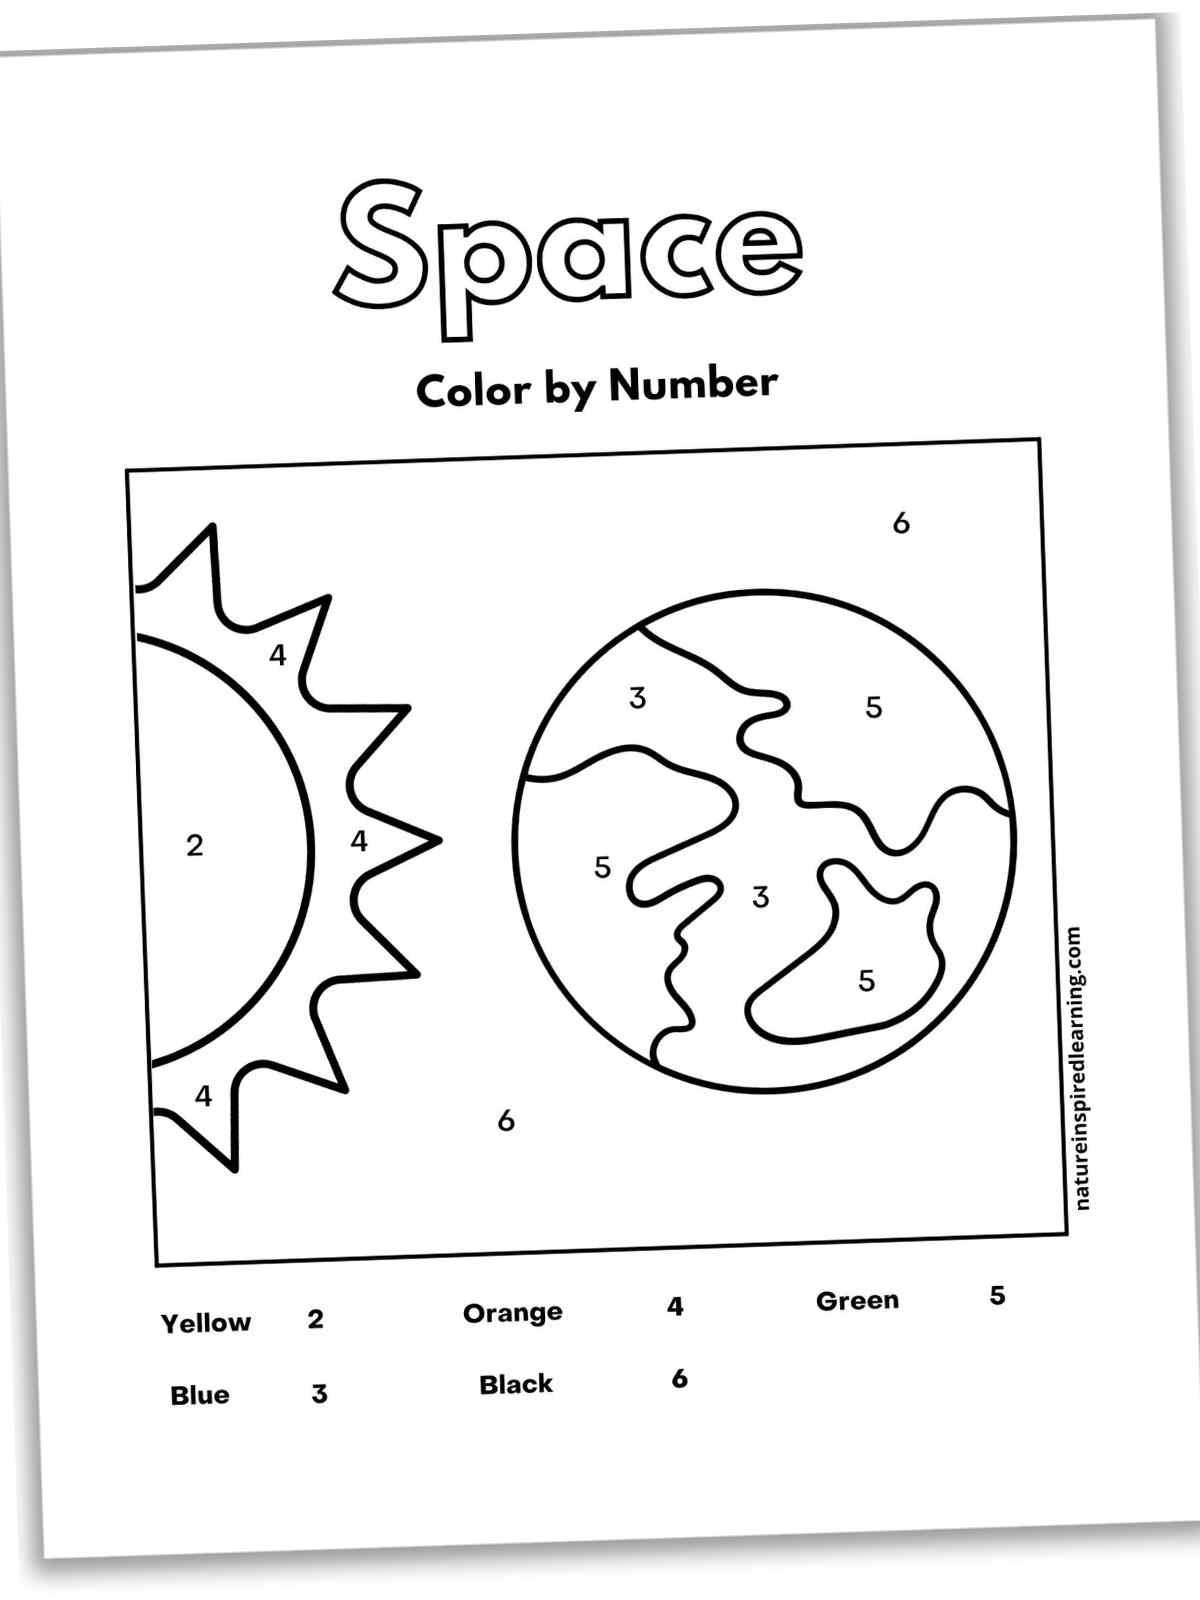 Black and white worksheet with Space written in outline form above the outline of the planet Earth and the sun. Number key at the bottom with numbers within the image.